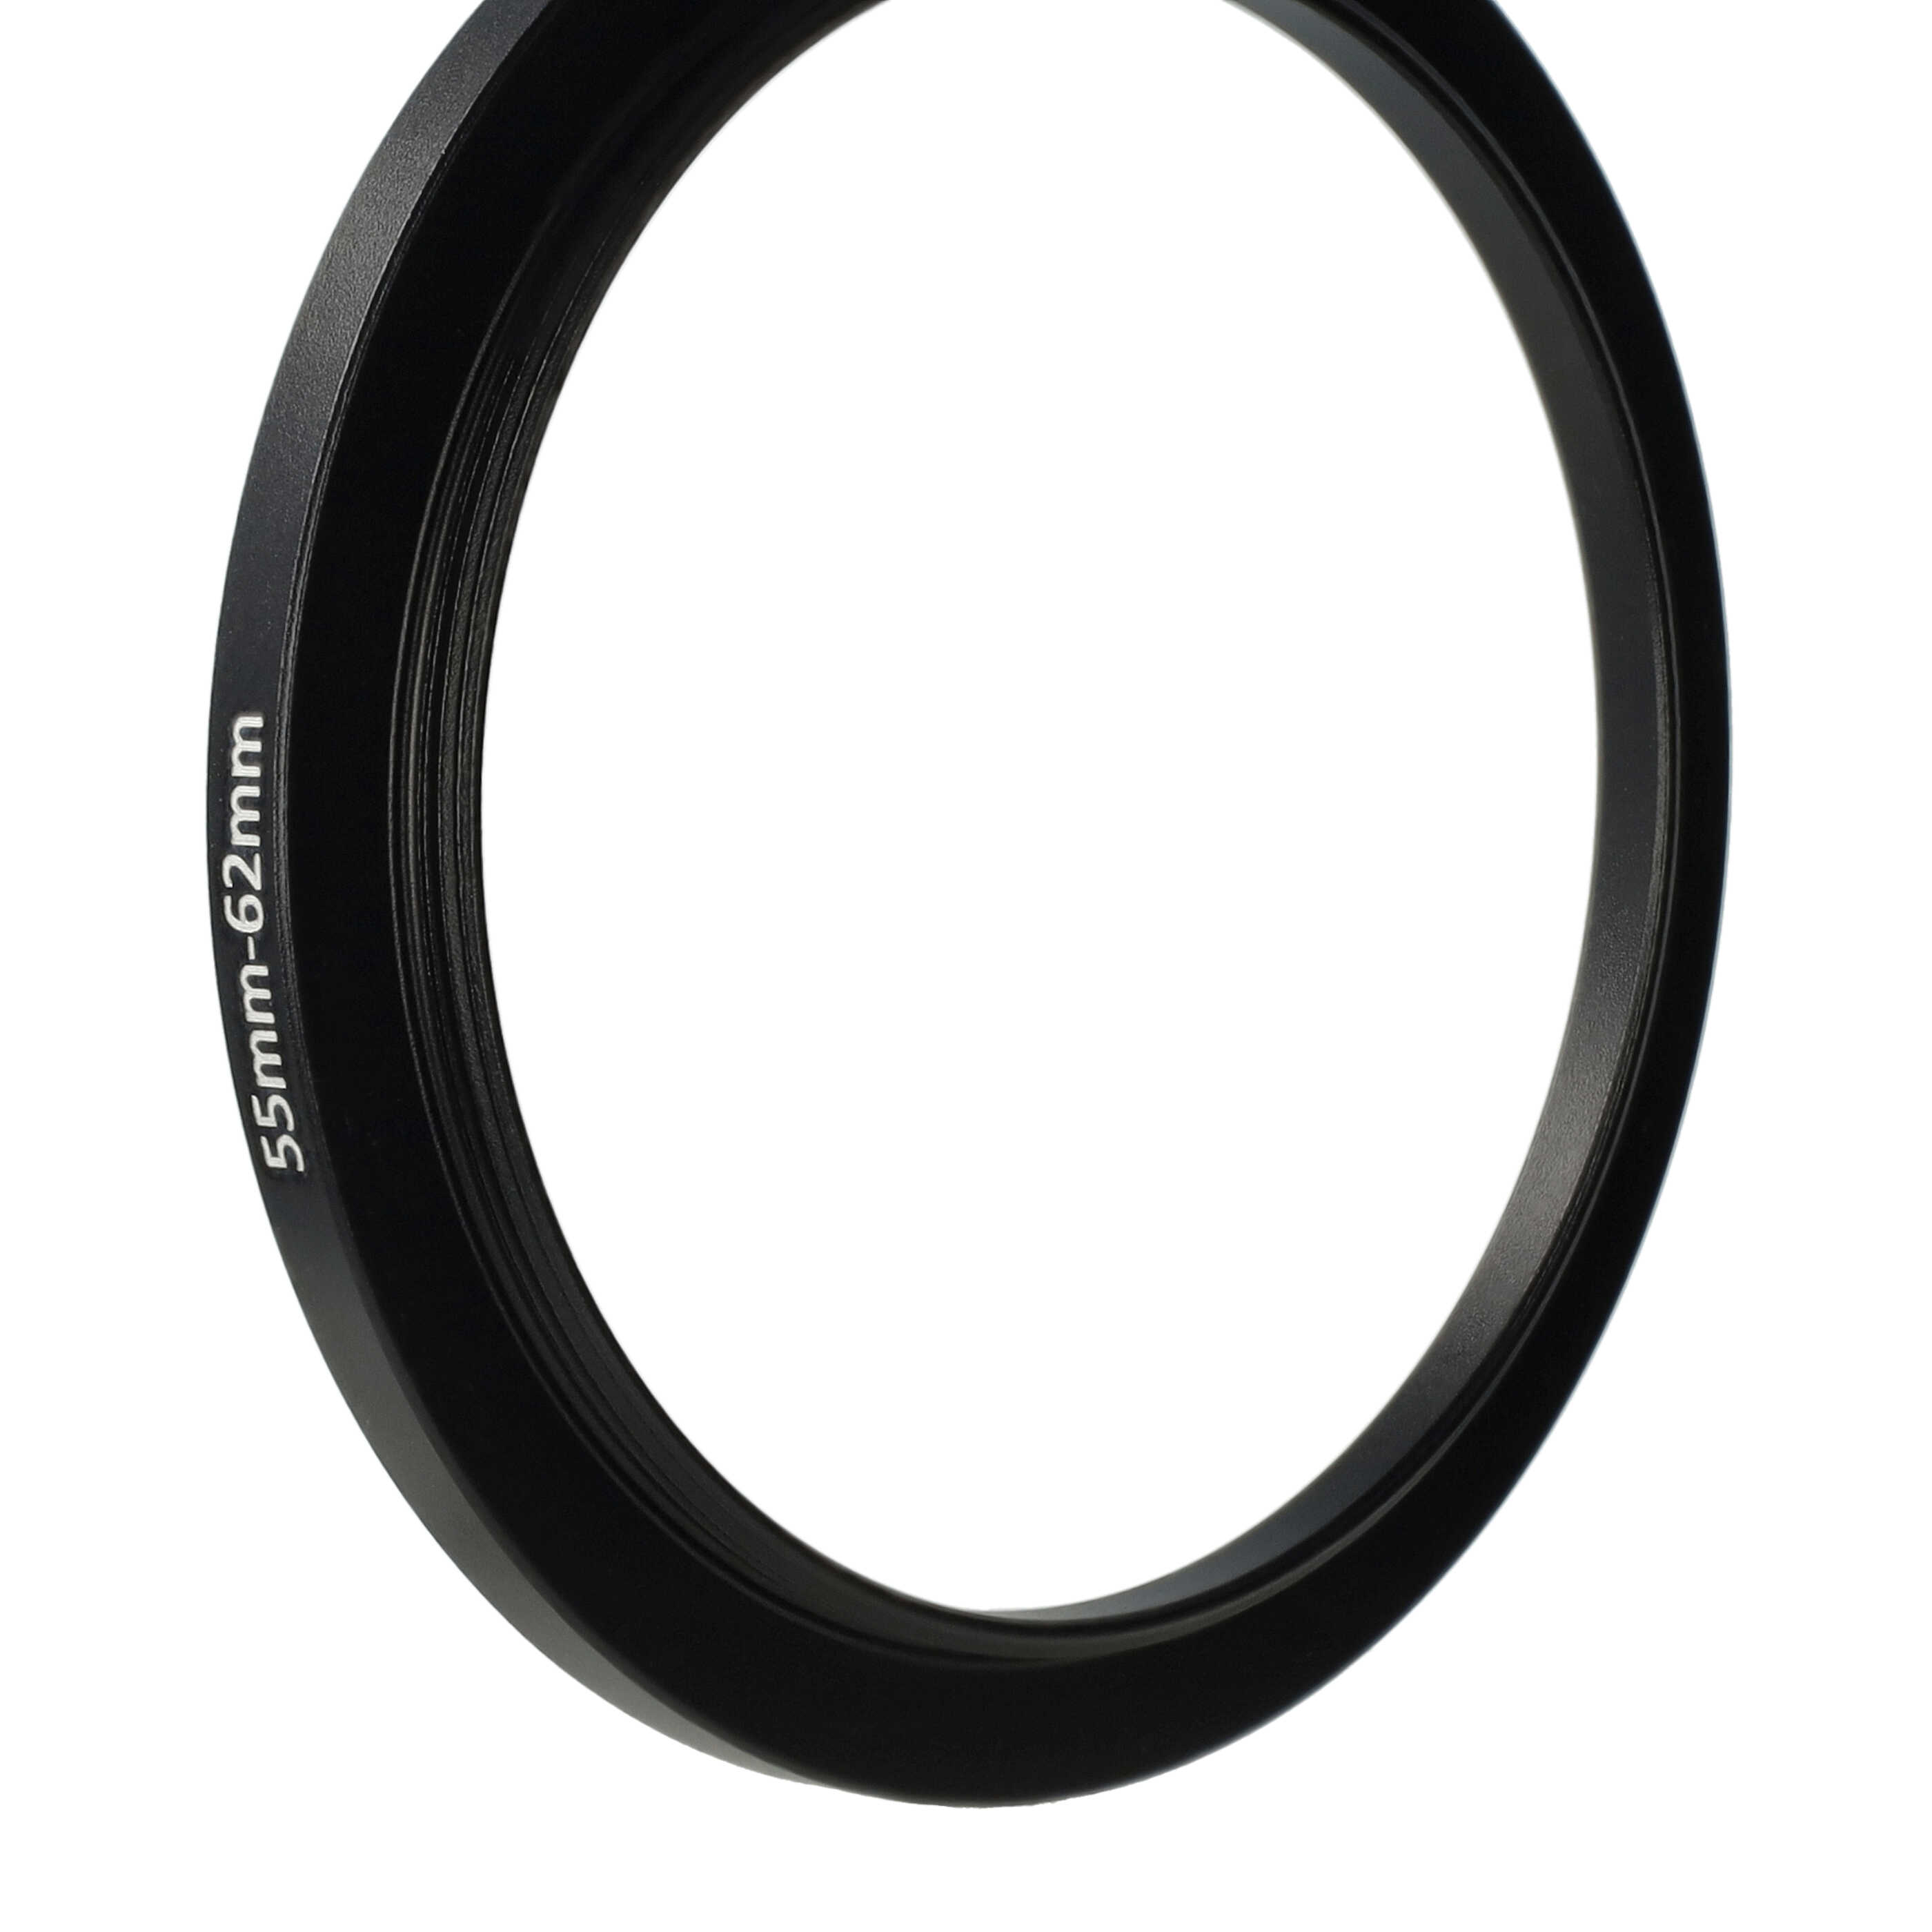 Step-Up Ring Adapter of 55 mm to 62 mmfor various Camera Lens - Filter Adapter